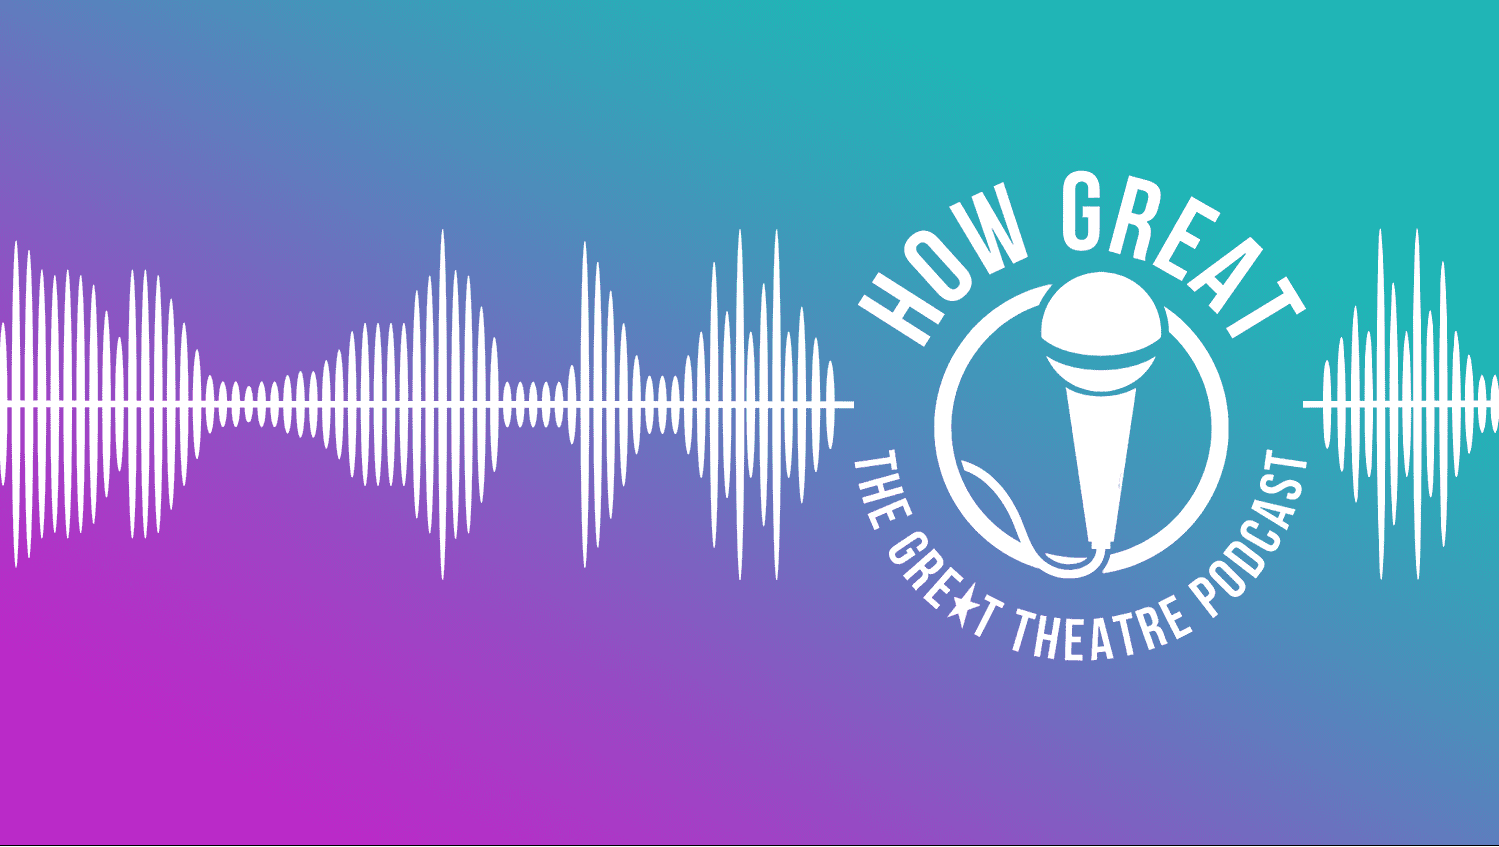 HOW GREAT: The GREAT Theatre Podcast